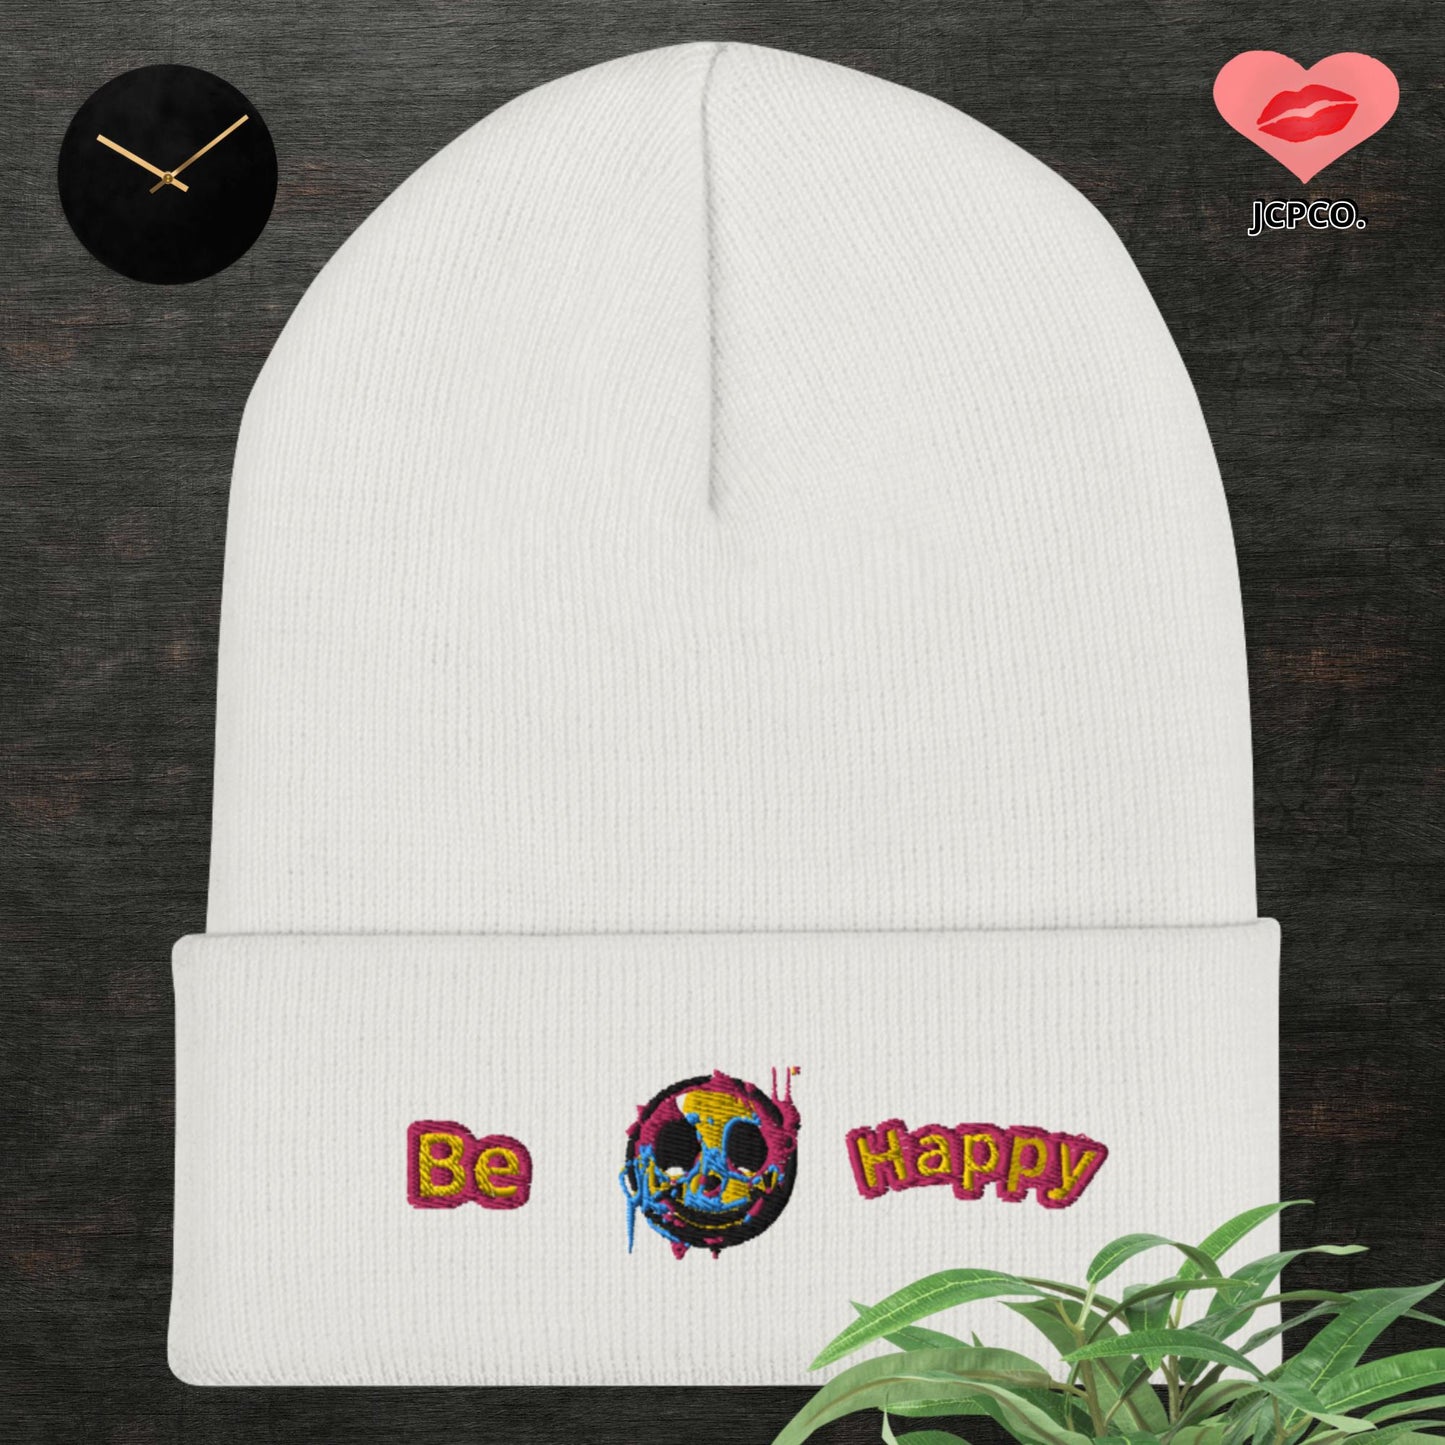 💕Don't Worry Be Happy Cuffed Beanie🧢